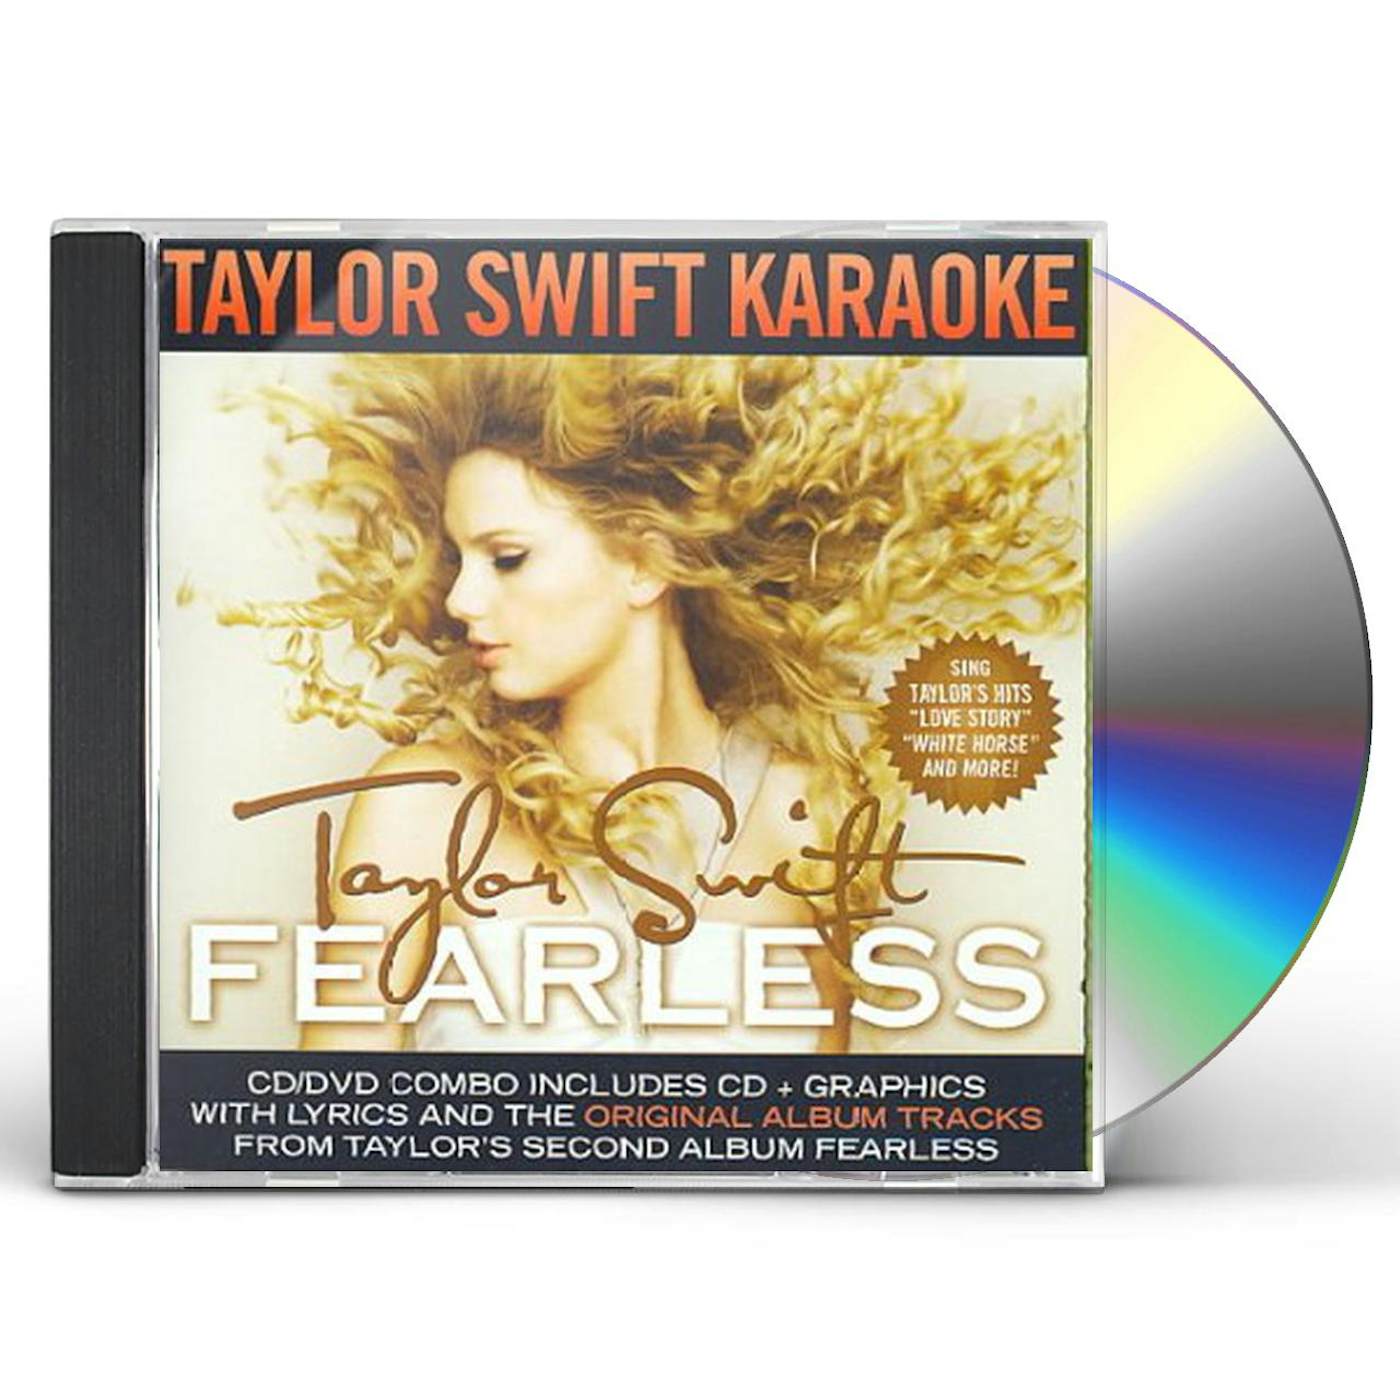 Taylor Swift - Fearless (2009 Edition) - CD 